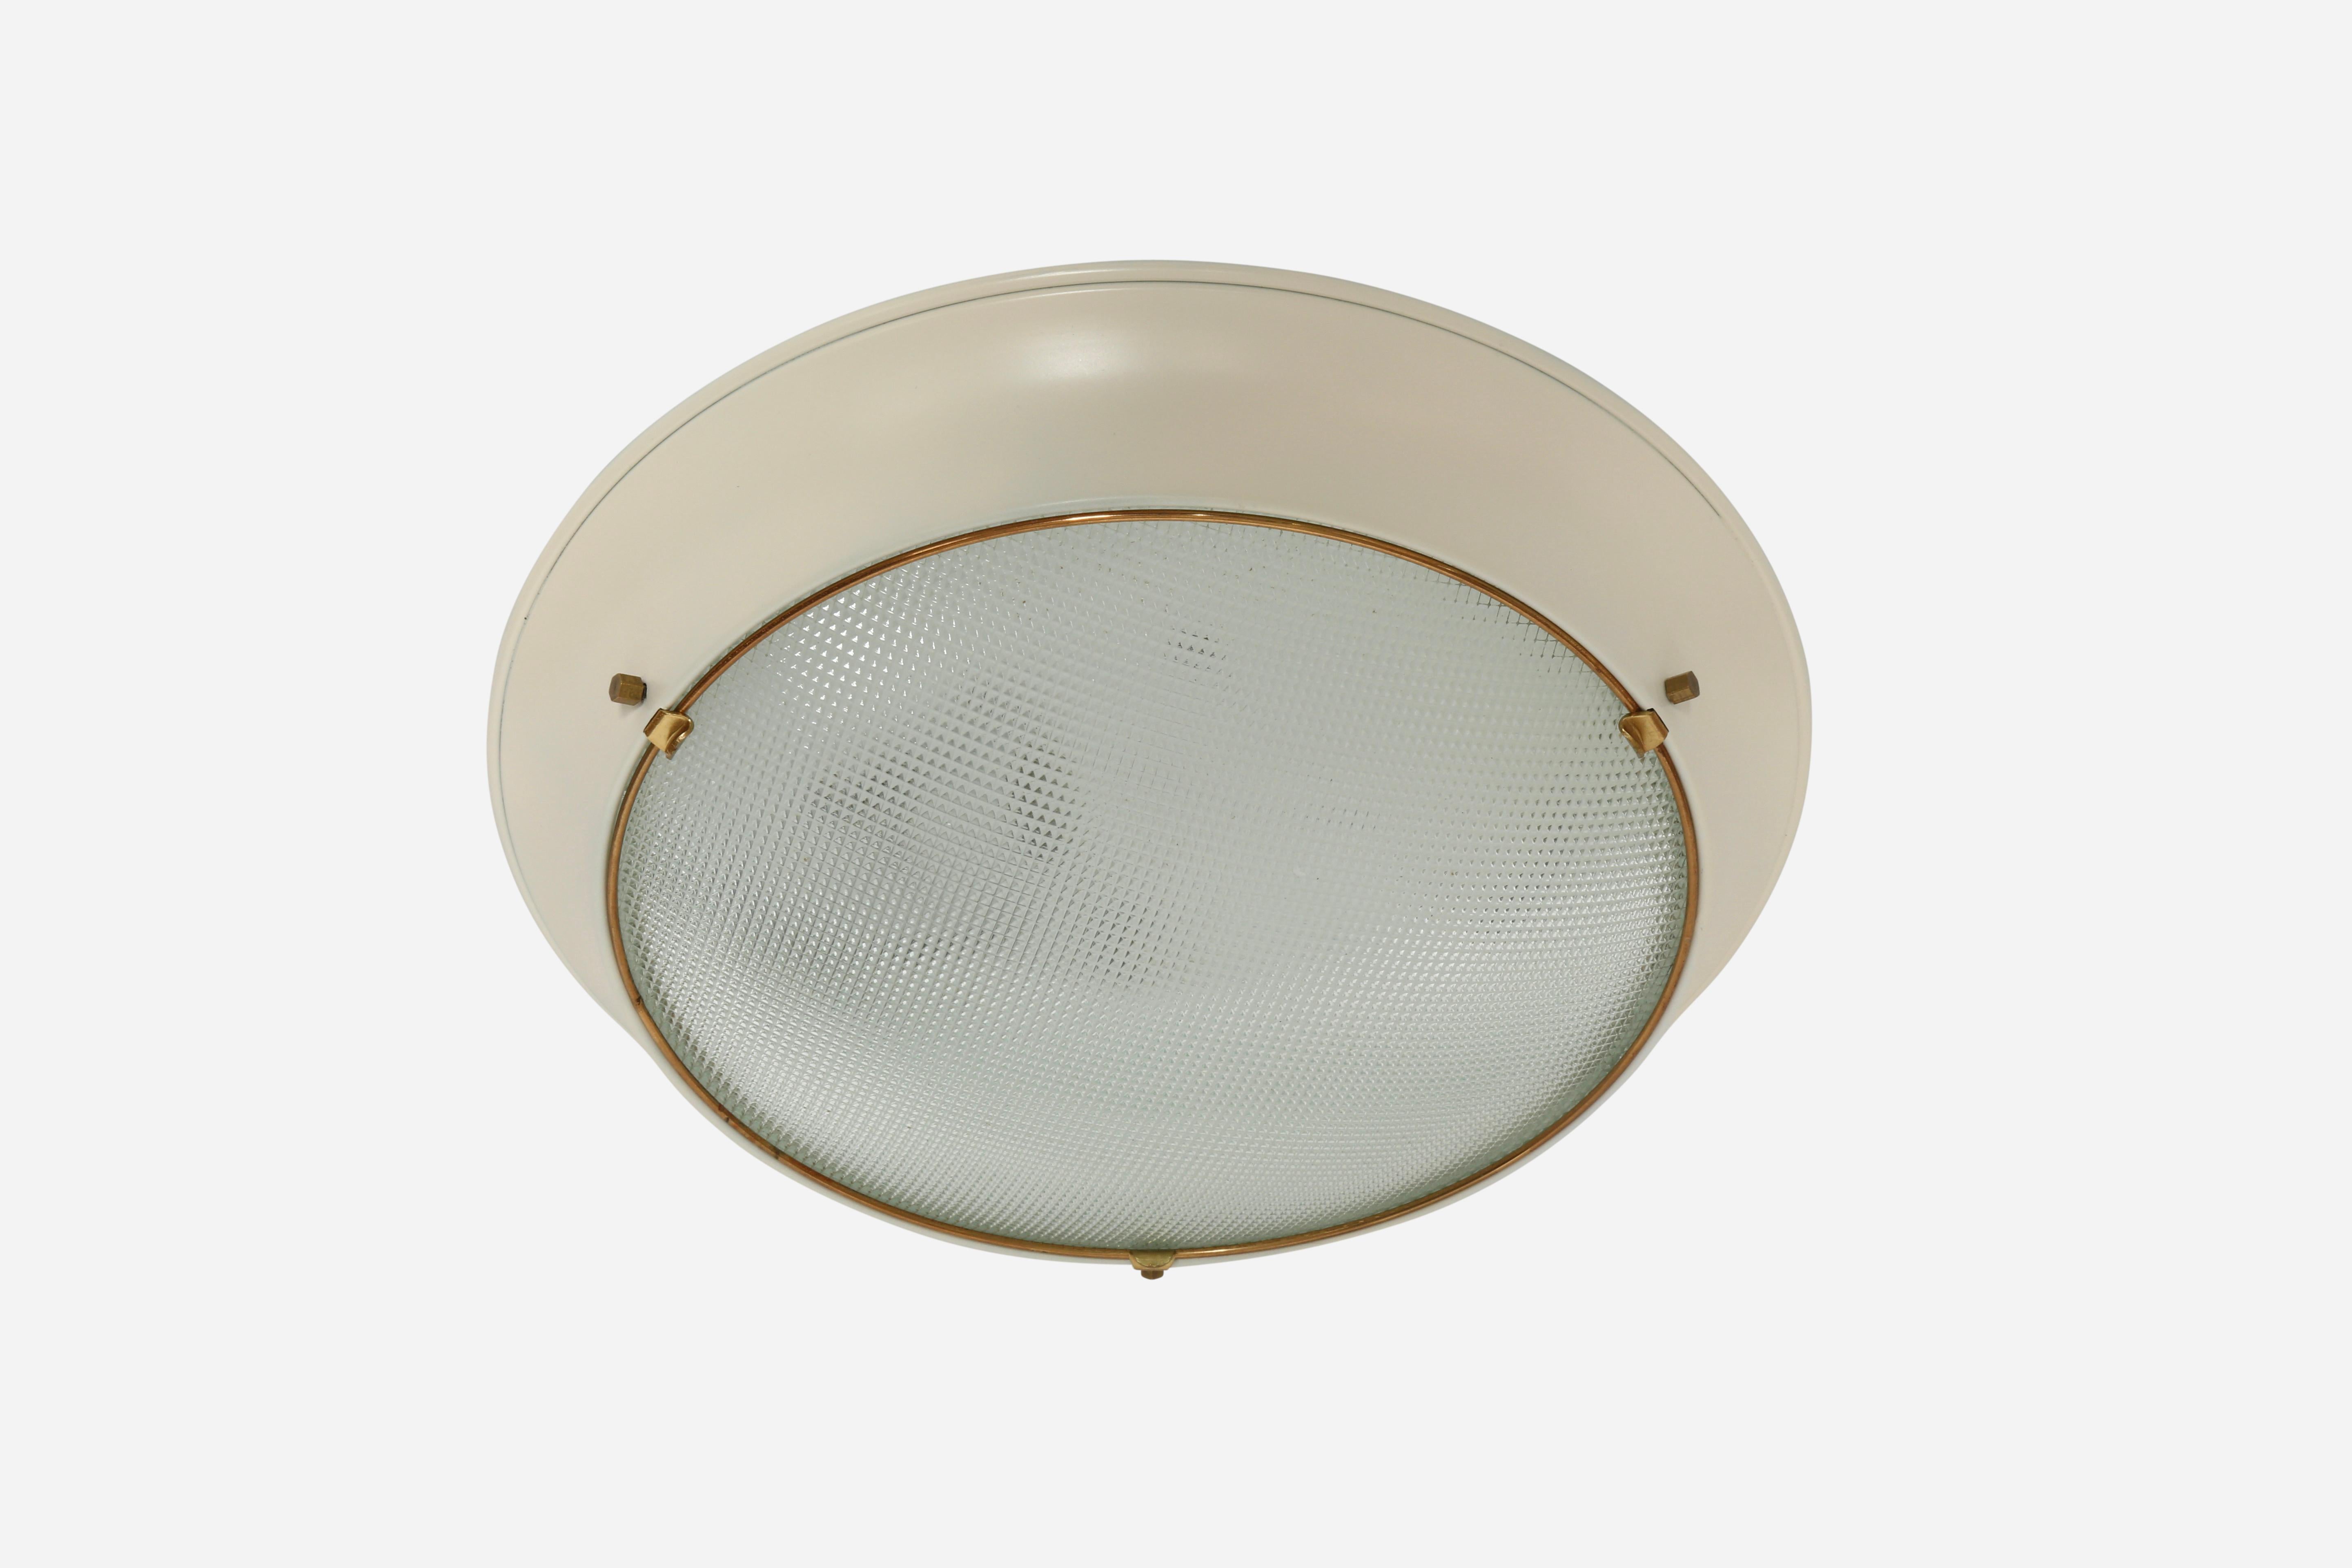 Stilnovo style flush mount ceiling light.
Italy 1960s
Rewired for US.
Takes one medium base bulb.
3 flush mounts are available.
Also 8 flush mounts 12 3/8 inches in diameter are available.
Please inquire.
Price is for one flush mount.

We take pride